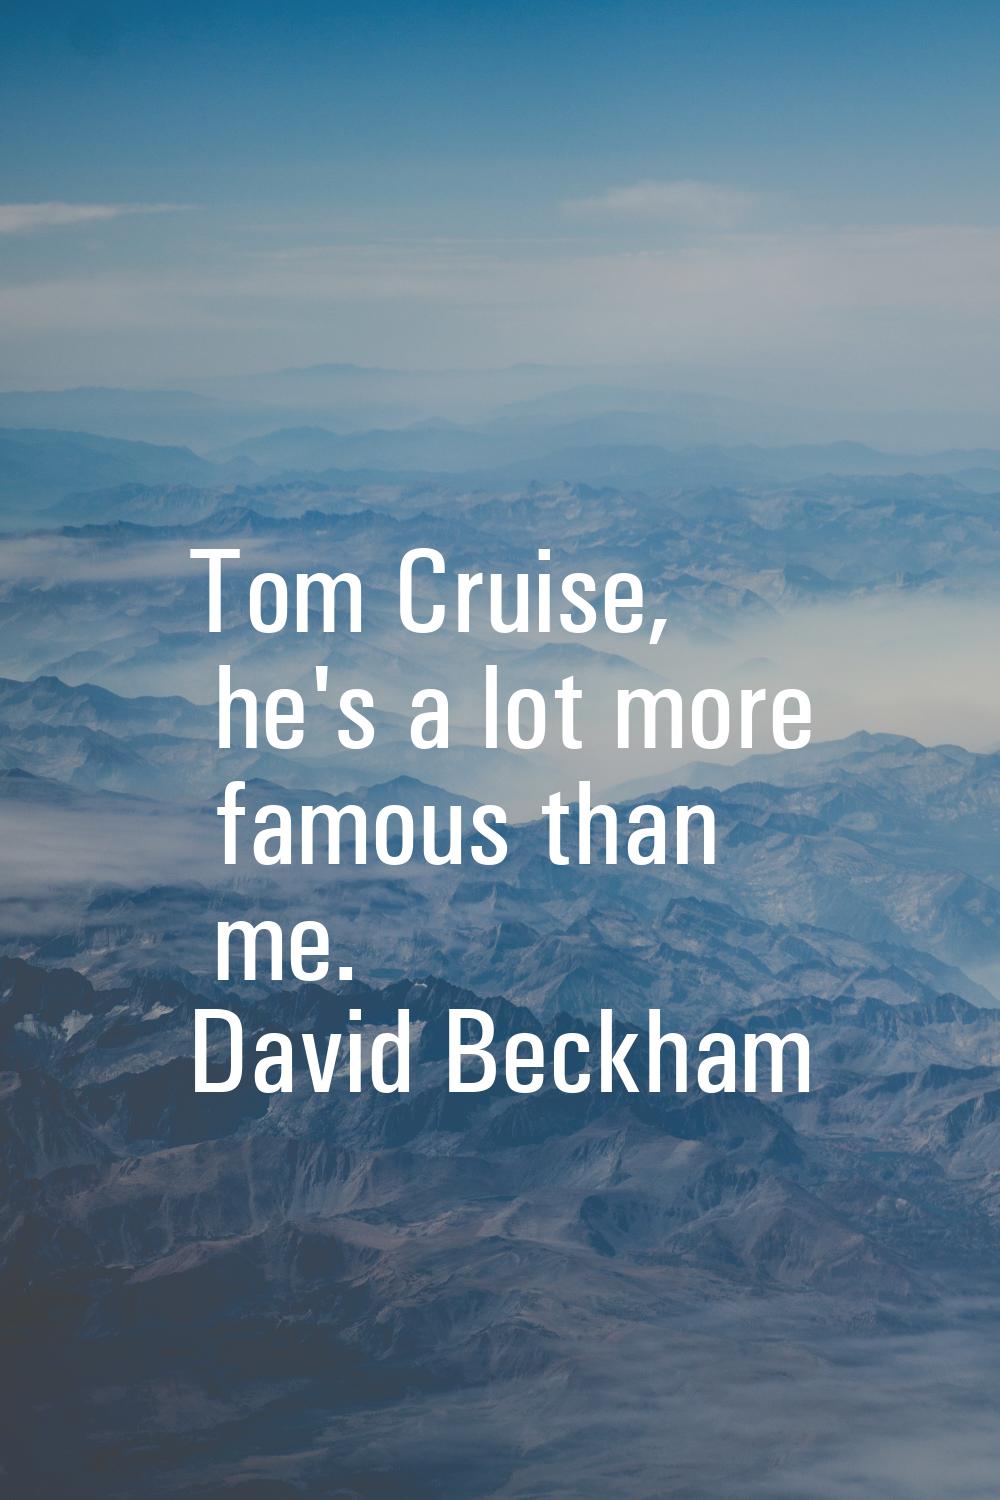 Tom Cruise, he's a lot more famous than me.